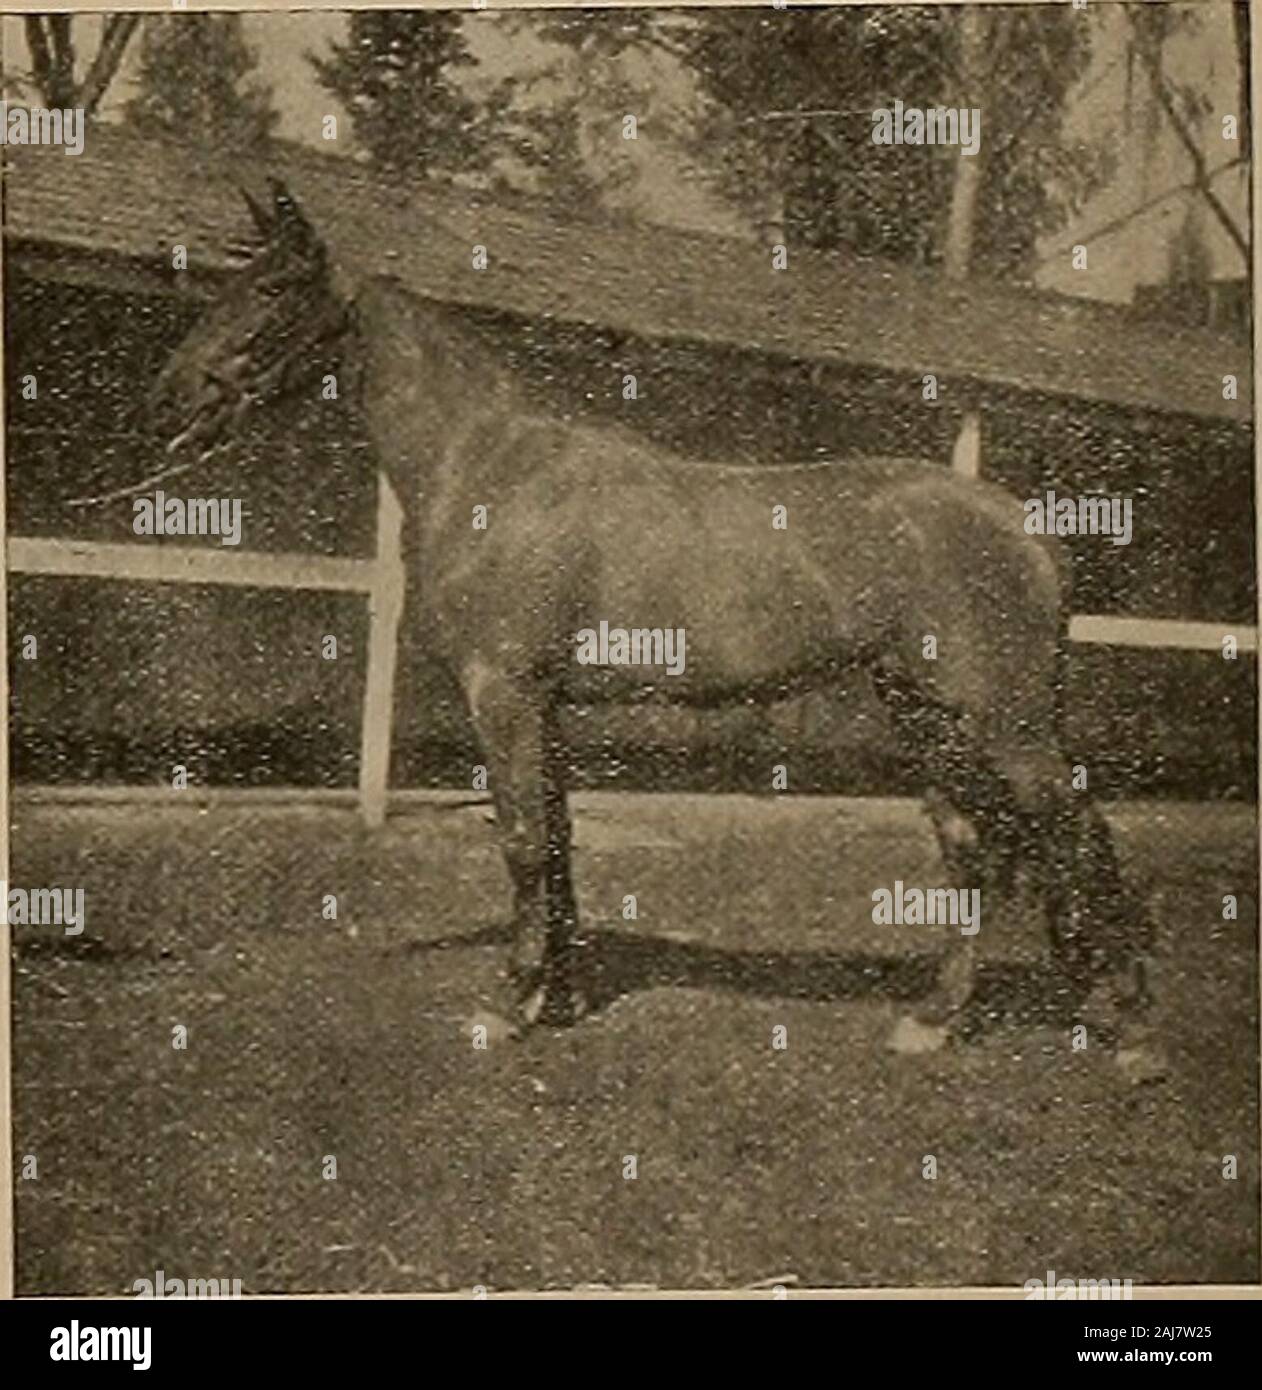 Breeder and sportsman . , theworlds record for mares; Centella, winner of twelveraces and $9265; Kildare, winner of more than twentyraces; Morven, a heavy winner on the flat and overthe sticks; Del Norte, who broke the Coast record at amile and a sixteenth; Top Gallant, winner of fourteenraces and in the money on fifty-three occasions;Horatio, a good two and three year old; Phoebe Ann,. NORA MCKINNEY. This handsome four year old filly is in FarmerBunchs string at San Jose. She is by McKinney outof a mare by Dexter Prince, and was raised by DavidYoung, of Stockton. She resembles Hazel Kinney2:0 Stock Photo